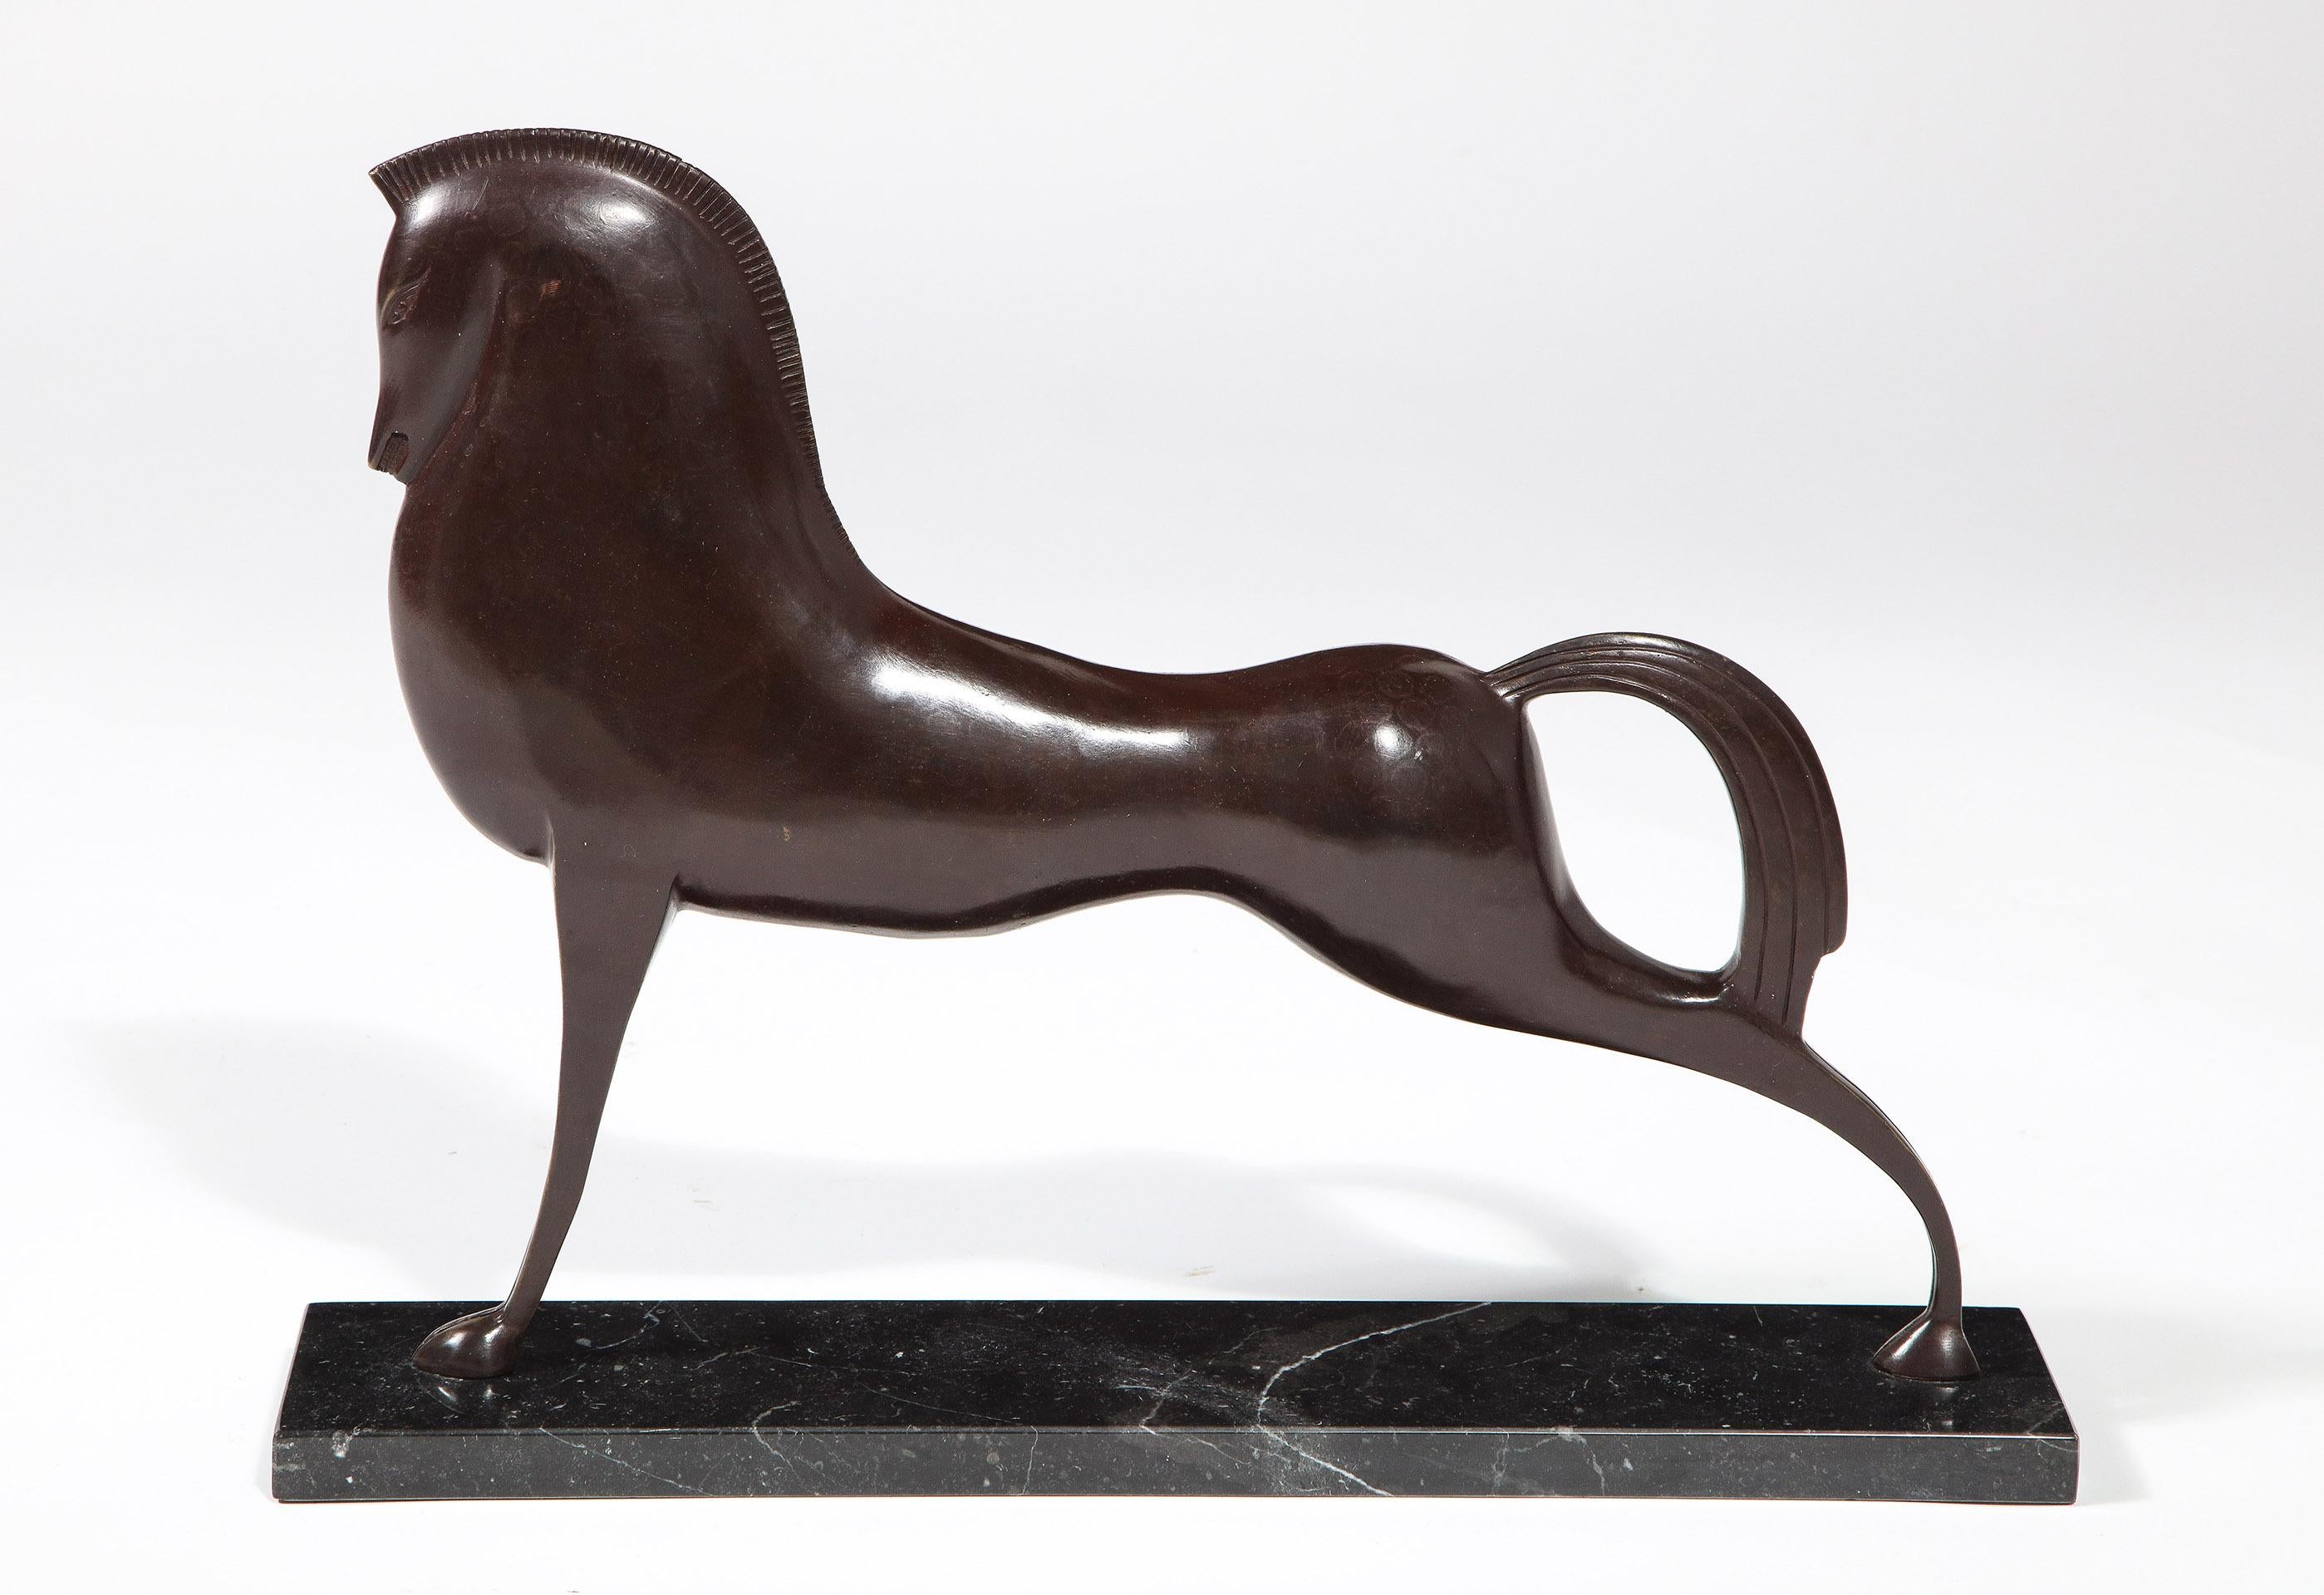 The ancient Greek stylized horse mounted on a marble base.